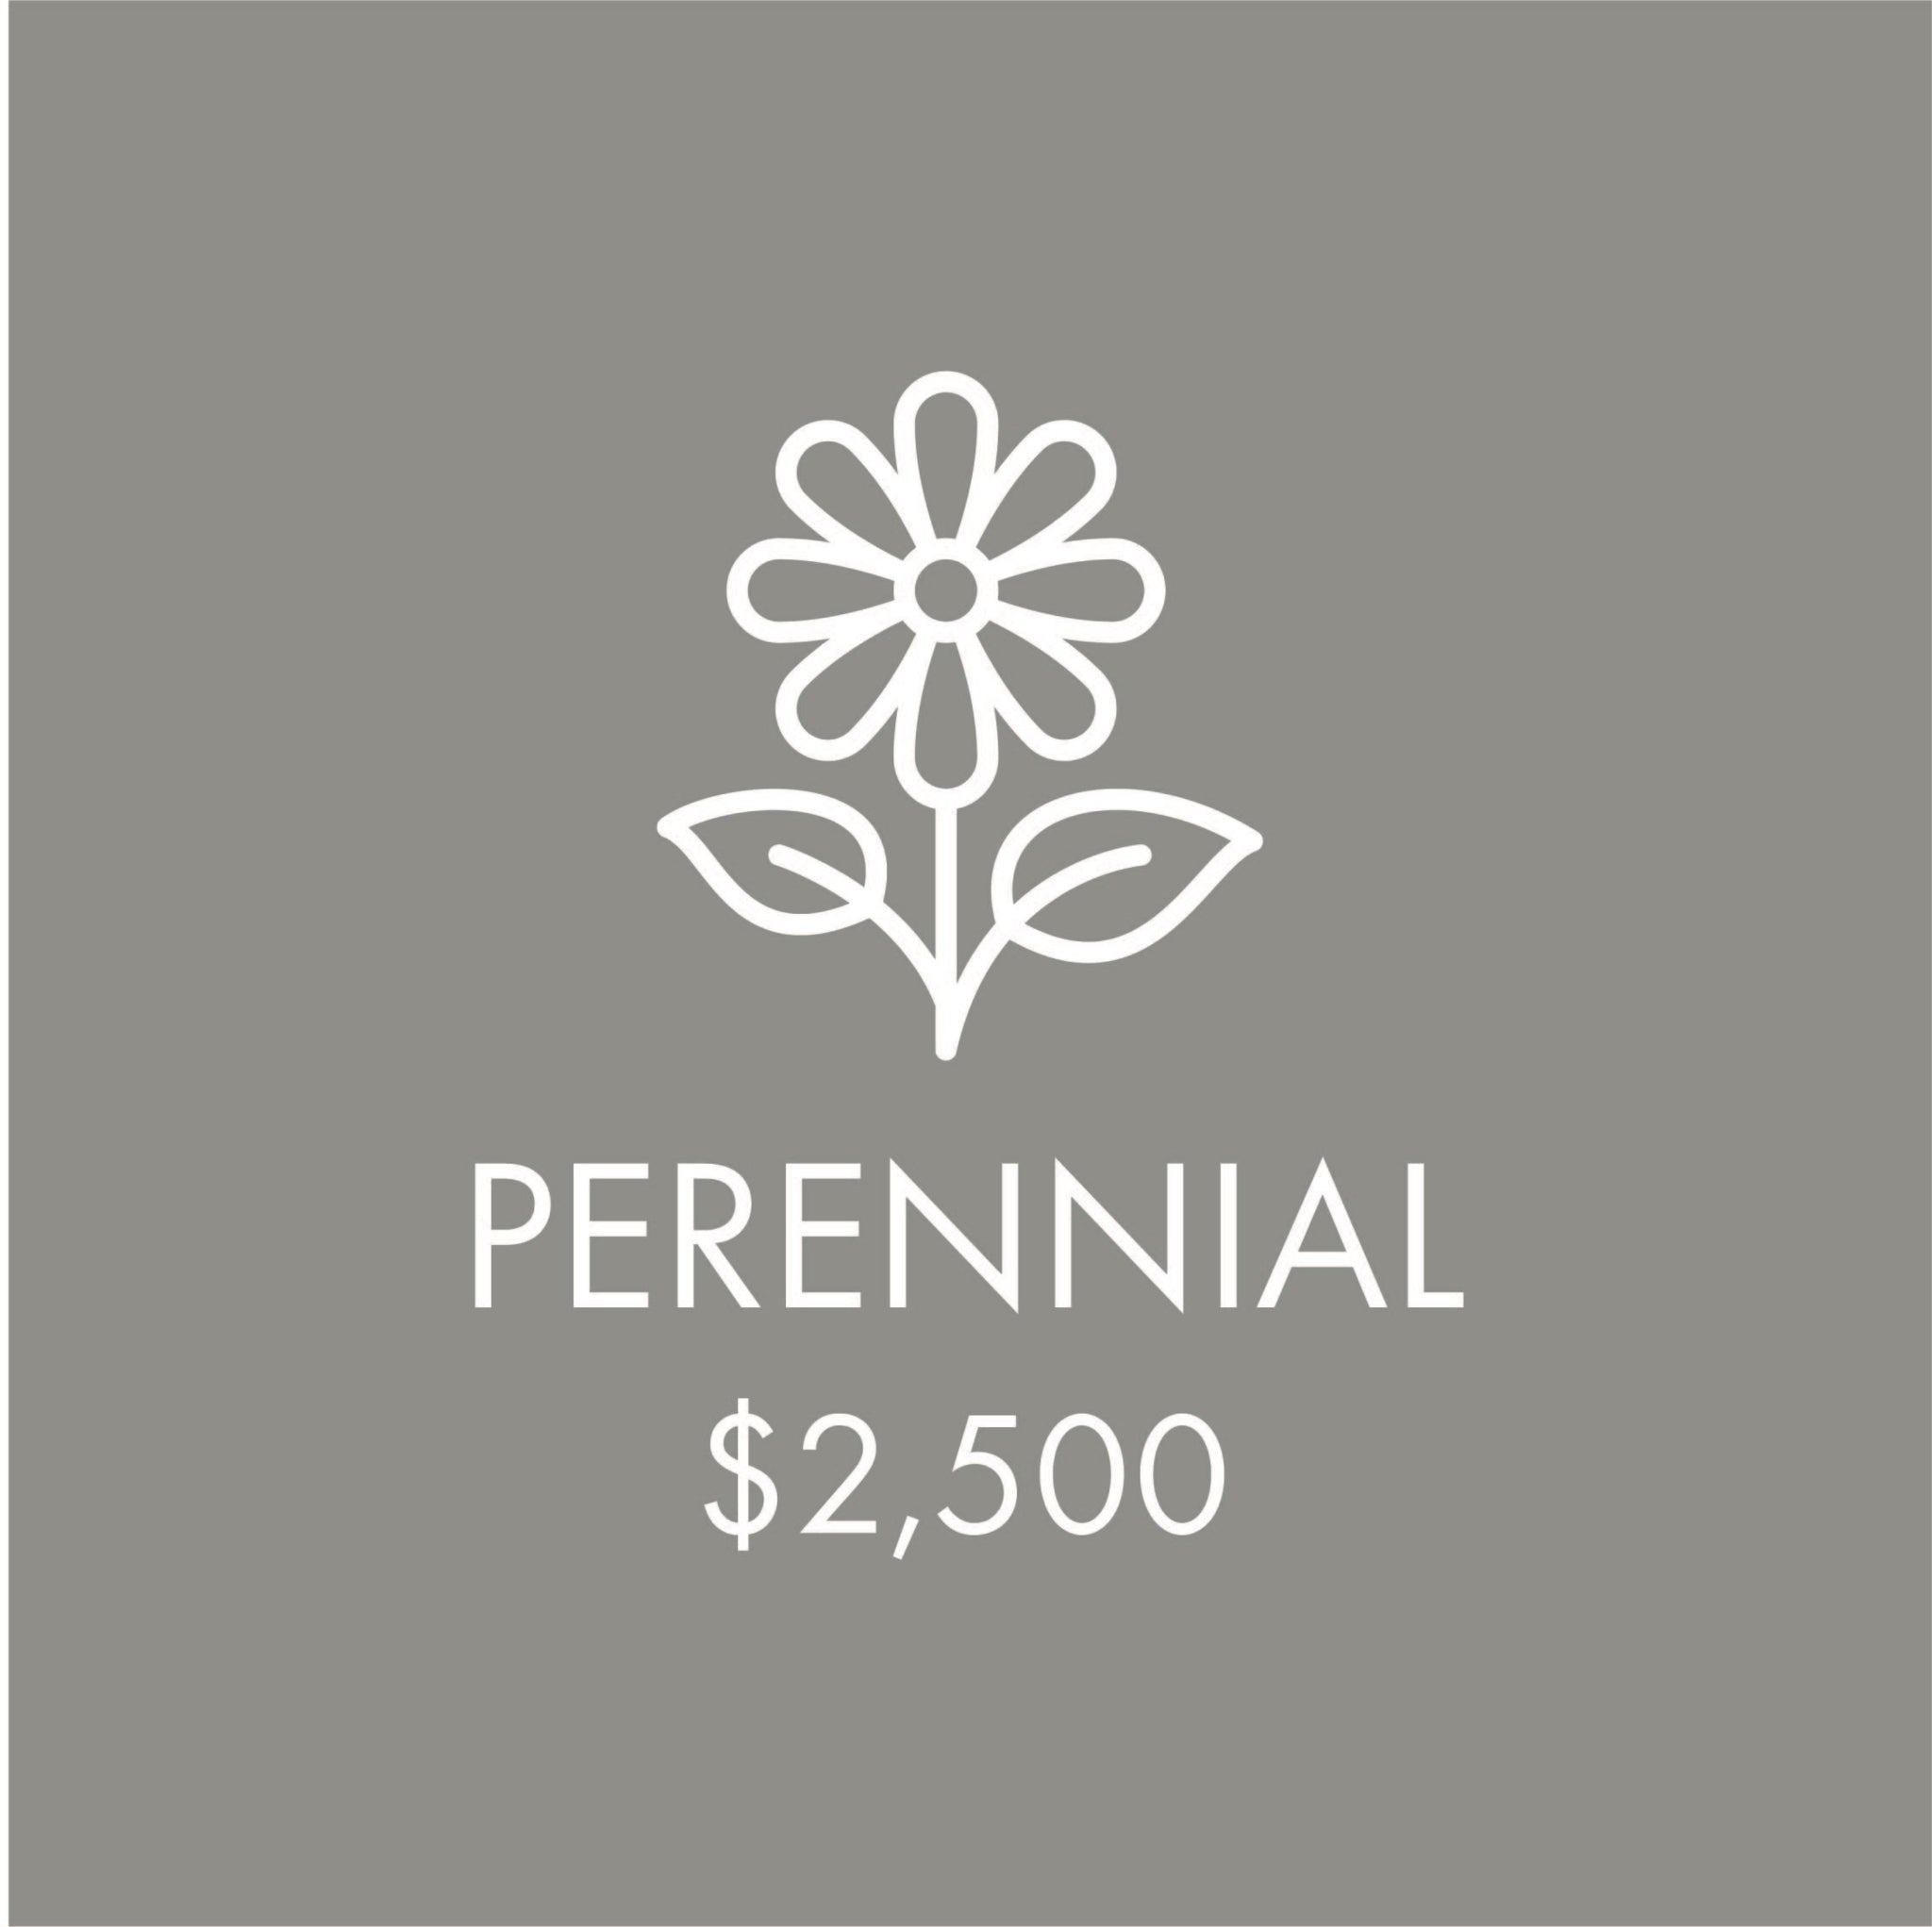 Support LongHouse - Perennial $2,500